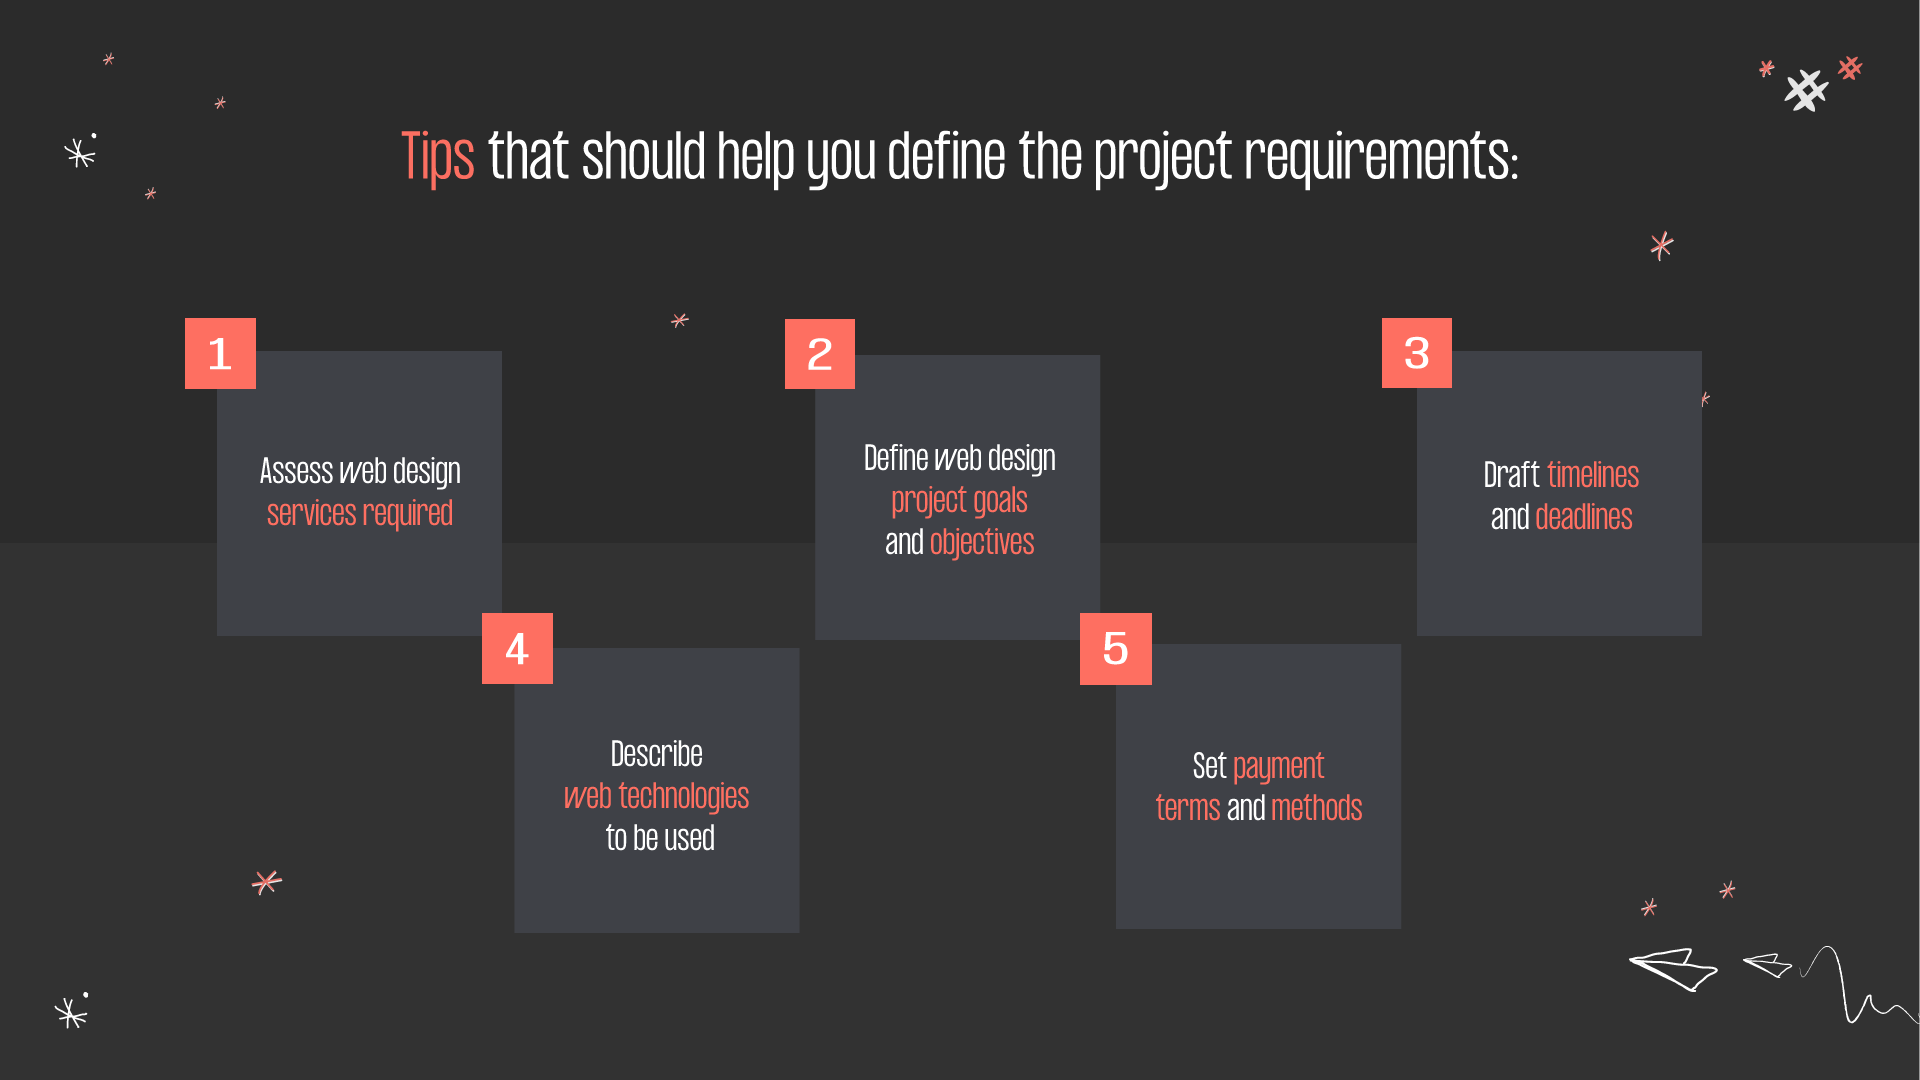 Tips that should help define the project requirements